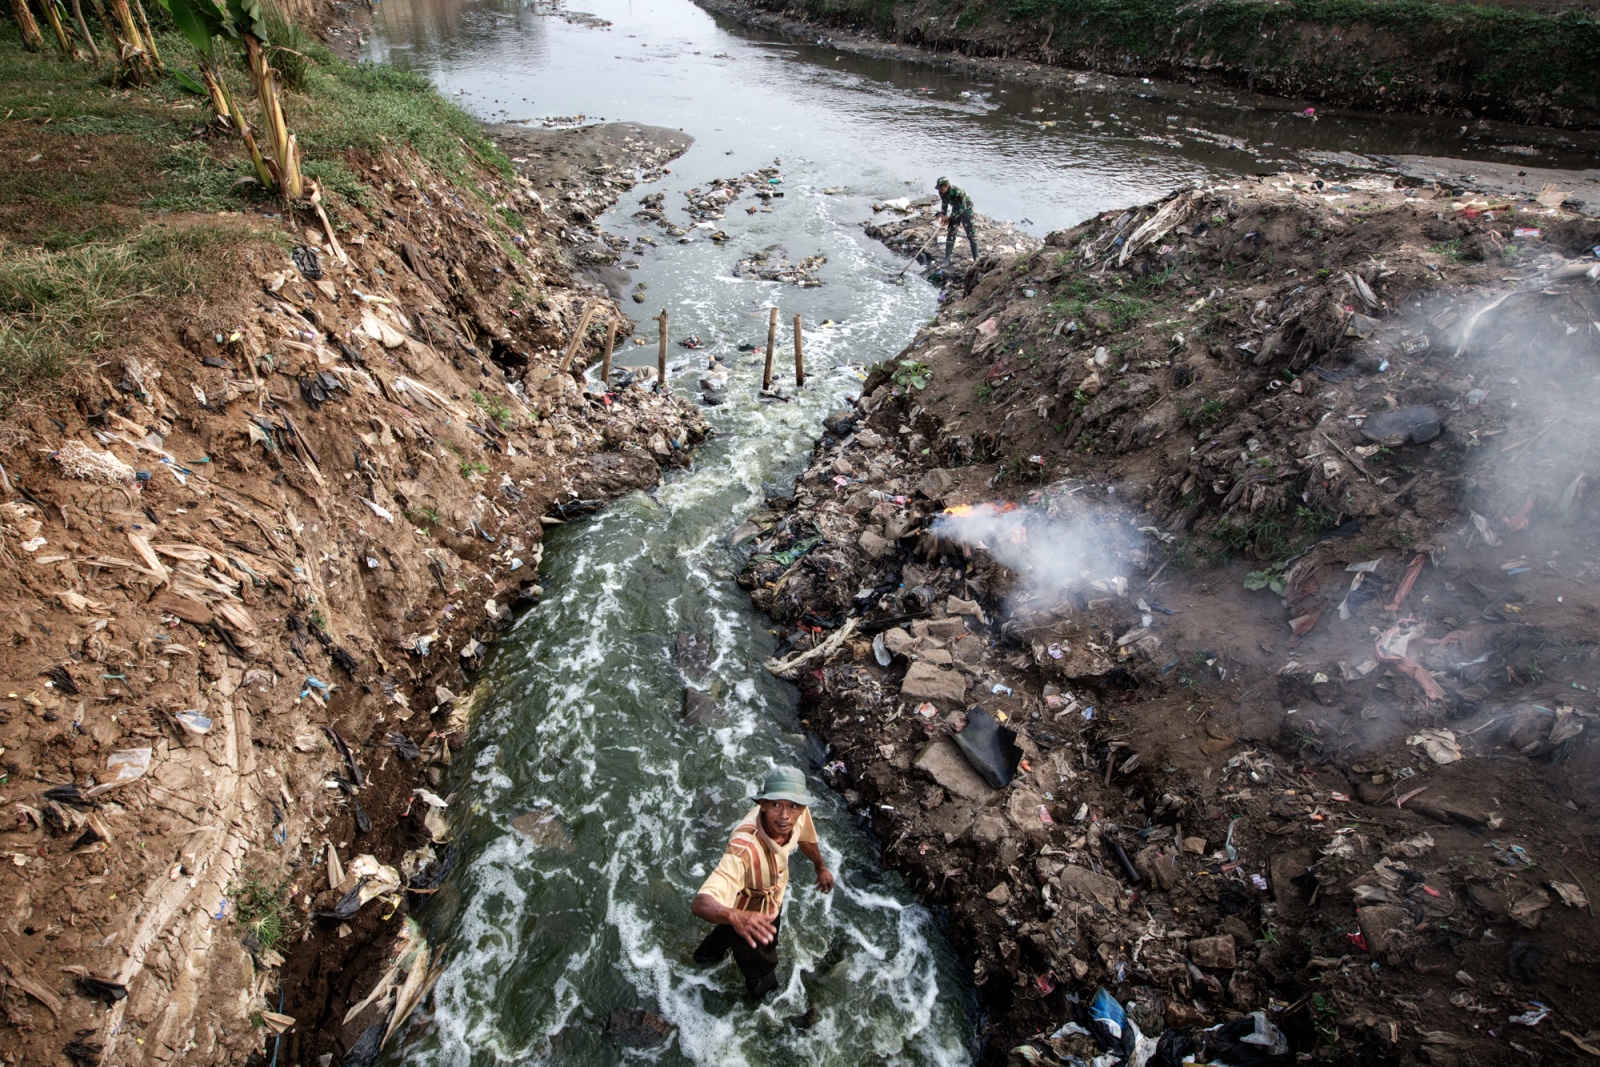 Bojongsoang village, Bandung Regency, West Jawa, Indonesia, 2019  - Recent research has found an alarming level of toxic substances in the Citarum River, with values ​​1000 times higher than the US standards for water safety. The use of its waters is extremely risky for the lives of the 30 million people. 